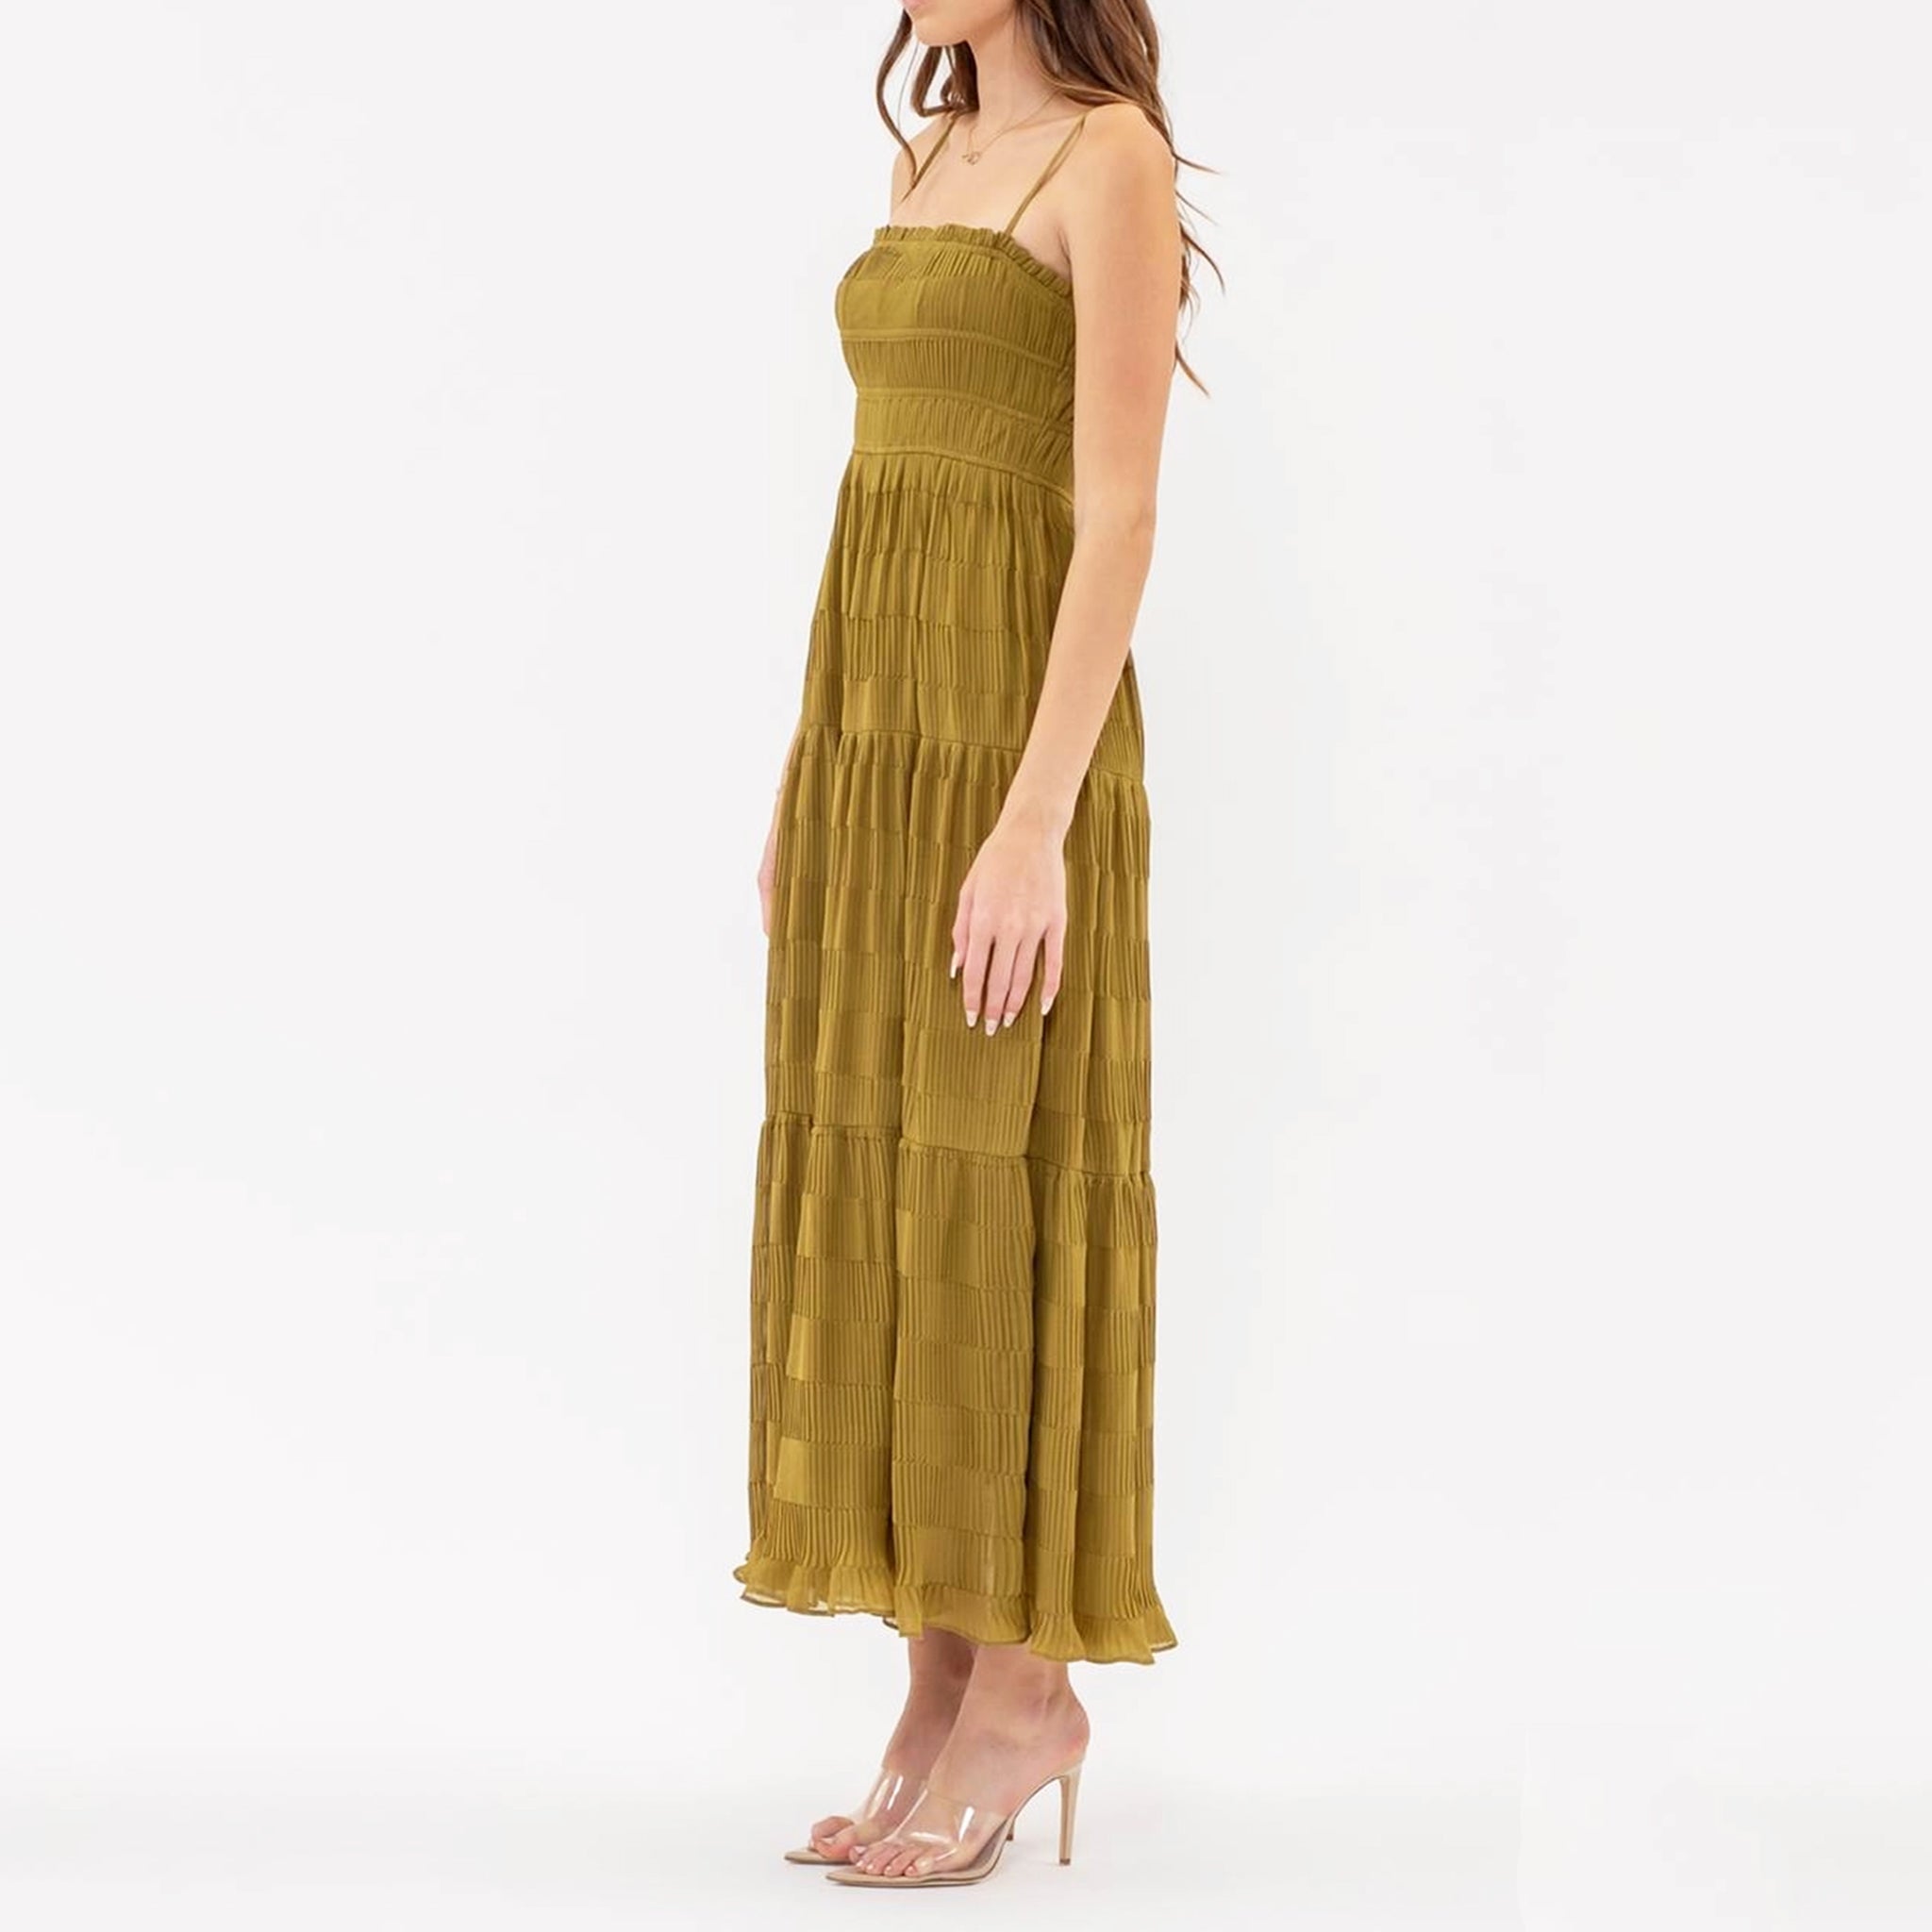 An olive green tiered midi dress with spaghetti straps.